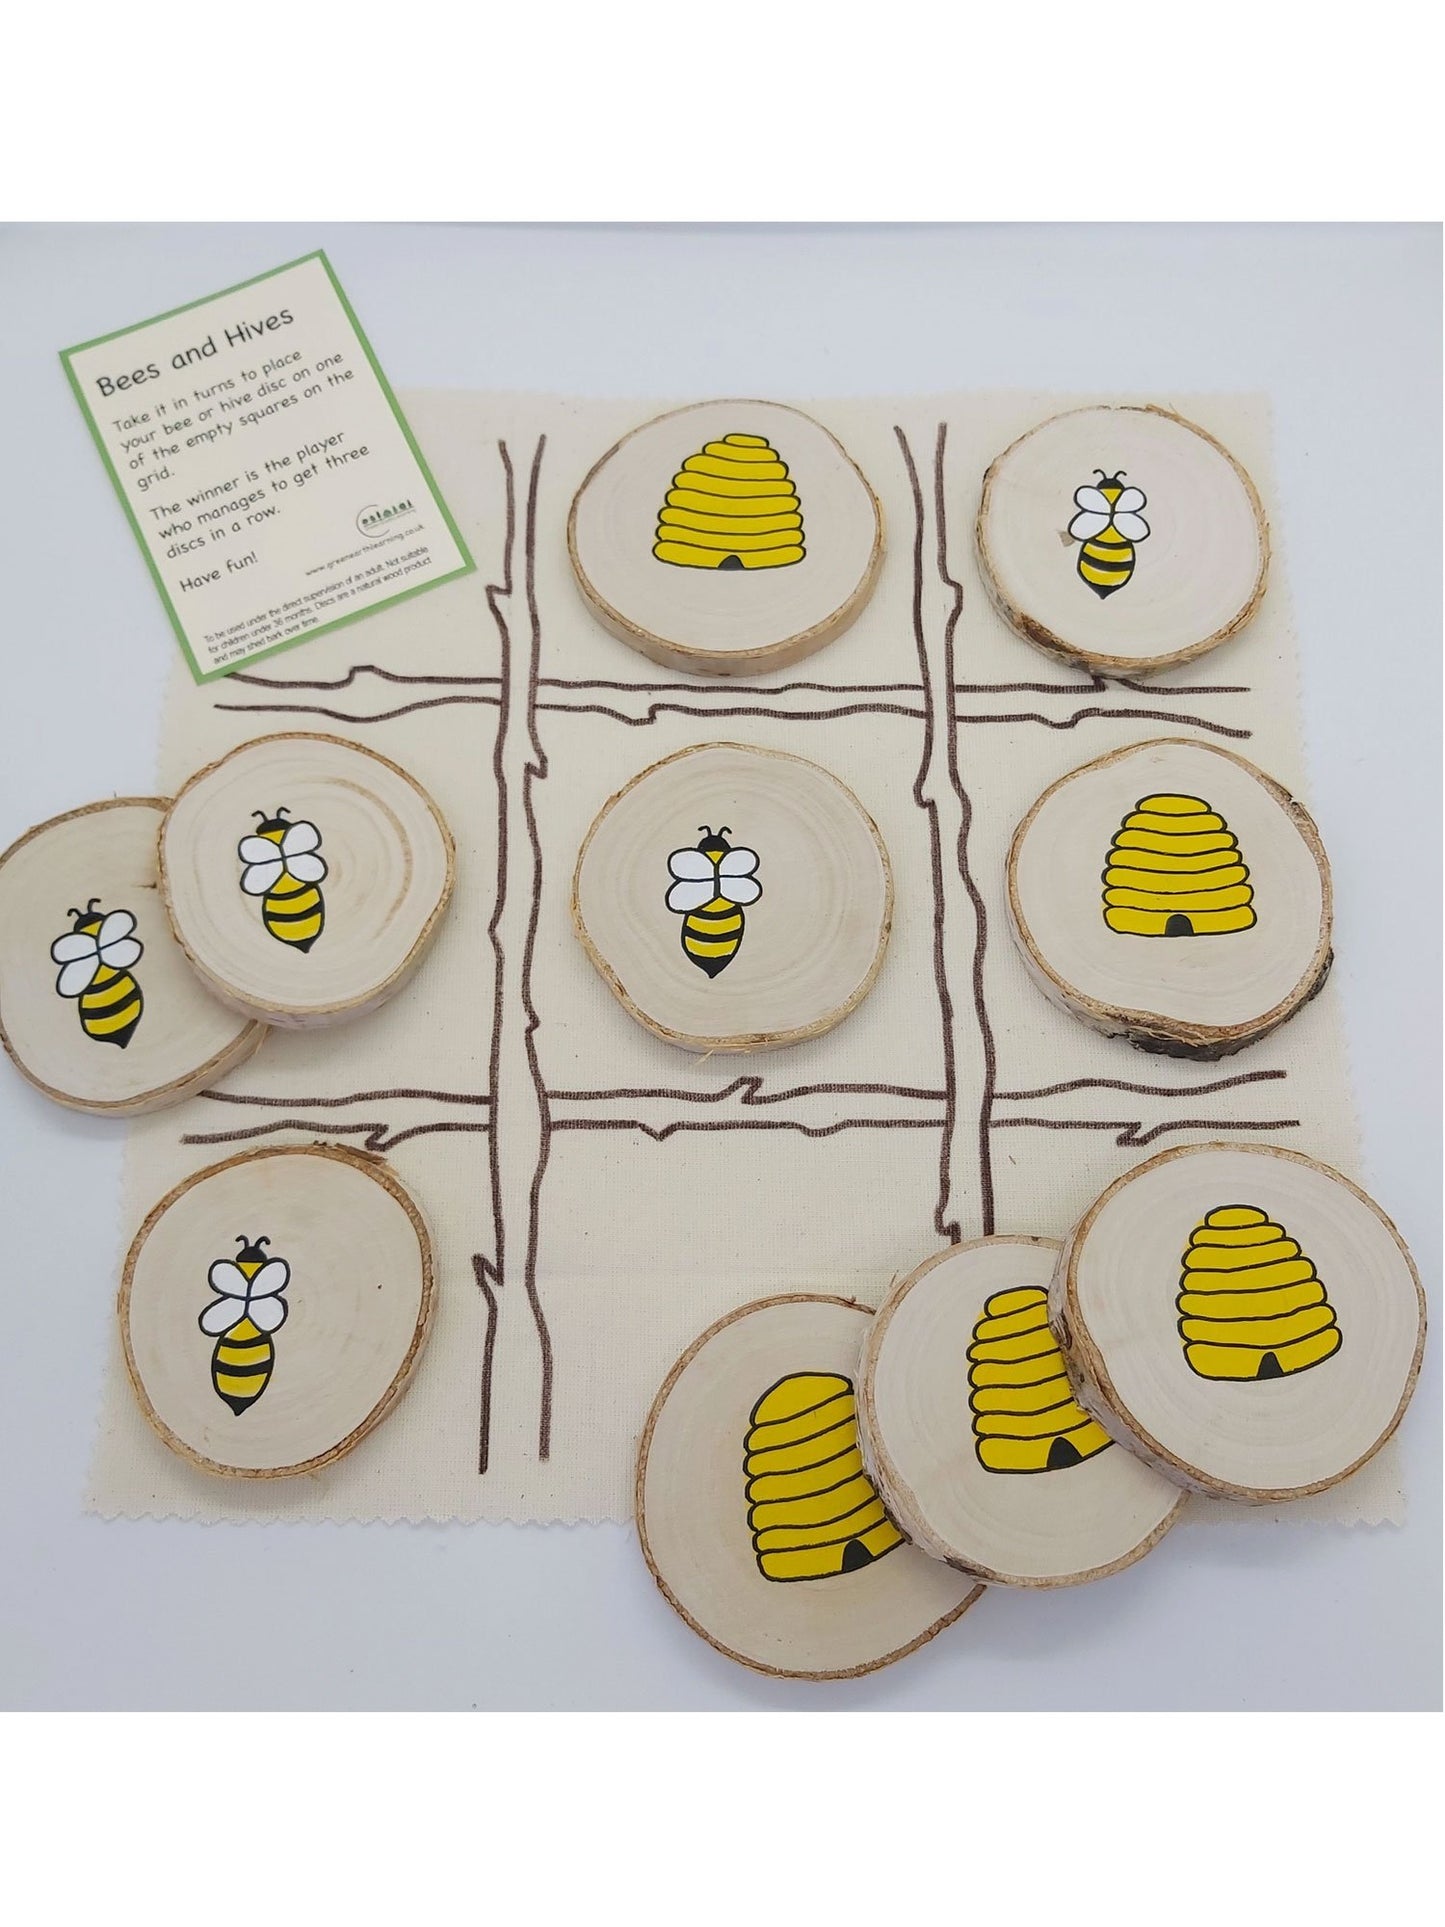 Green Earth Learning Bees and Hives Tic Tac Toe